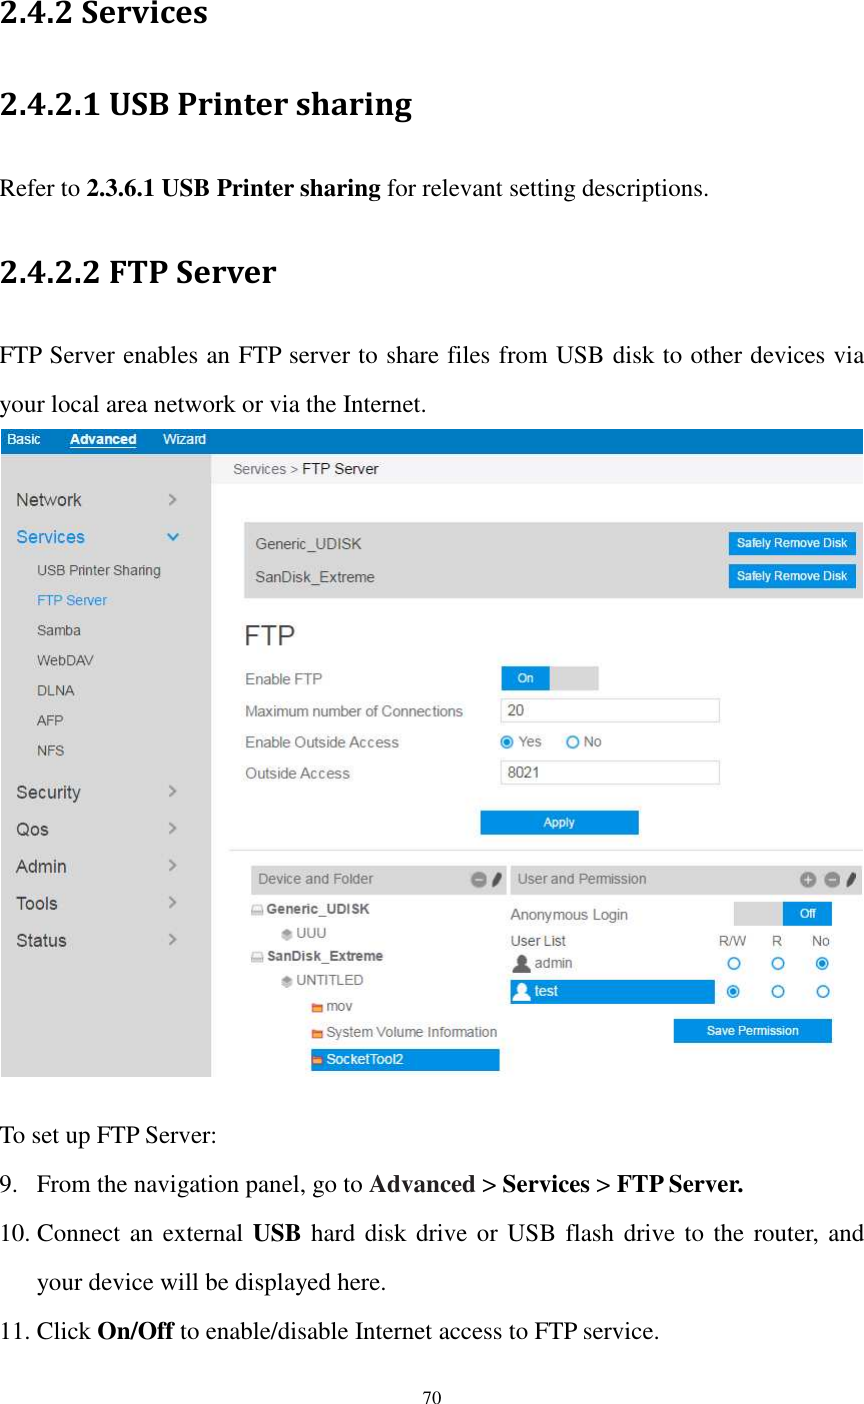  70  2.4.2 Services 2.4.2.1 USB Printer sharing Refer to 2.3.6.1 USB Printer sharing for relevant setting descriptions. 2.4.2.2 FTP Server FTP Server enables an FTP server to share files from USB disk to other devices via your local area network or via the Internet.     To set up FTP Server: 9. From the navigation panel, go to Advanced &gt; Services &gt; FTP Server. 10. Connect an external USB hard disk drive or USB flash drive to the router, and your device will be displayed here. 11. Click On/Off to enable/disable Internet access to FTP service. 